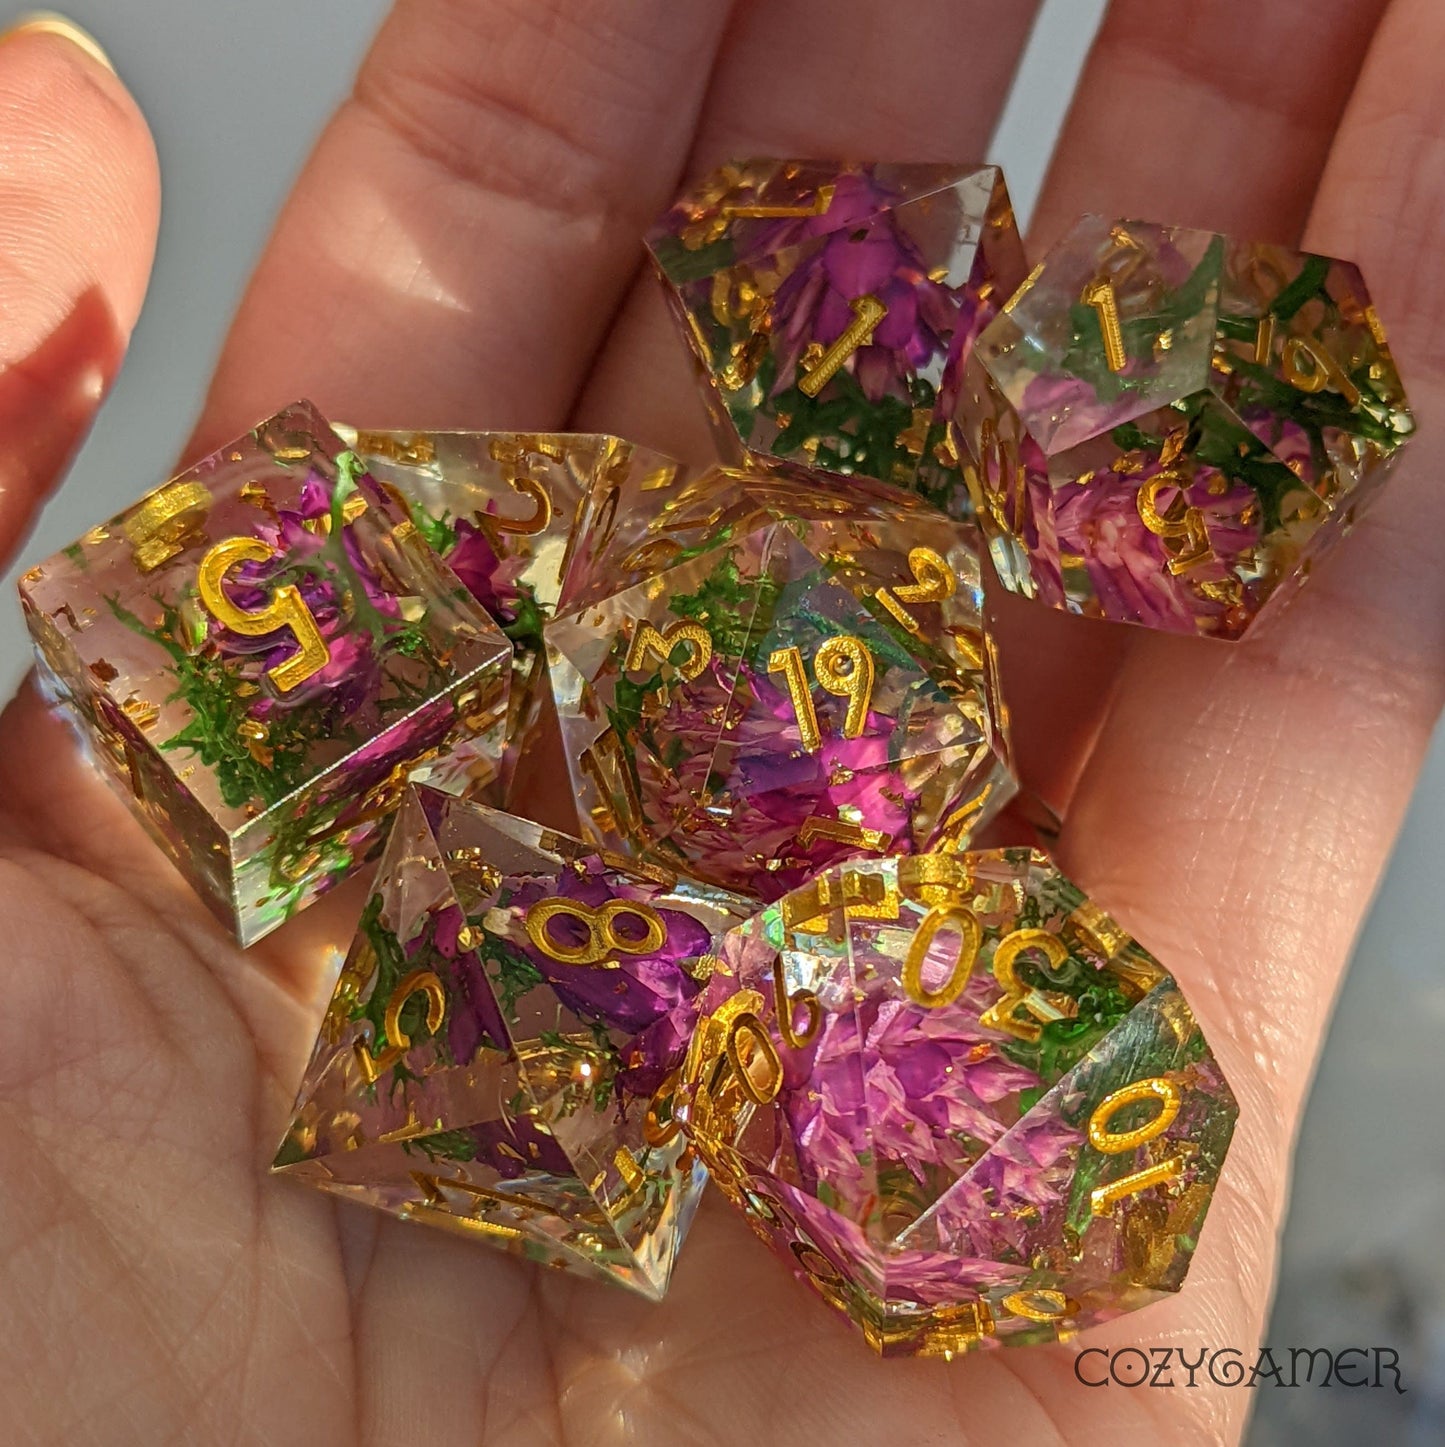 Purple Flowers and Green Moss Sharp Edge Resin Dice Set. 7 Piece DND dice set with real dried flowers.